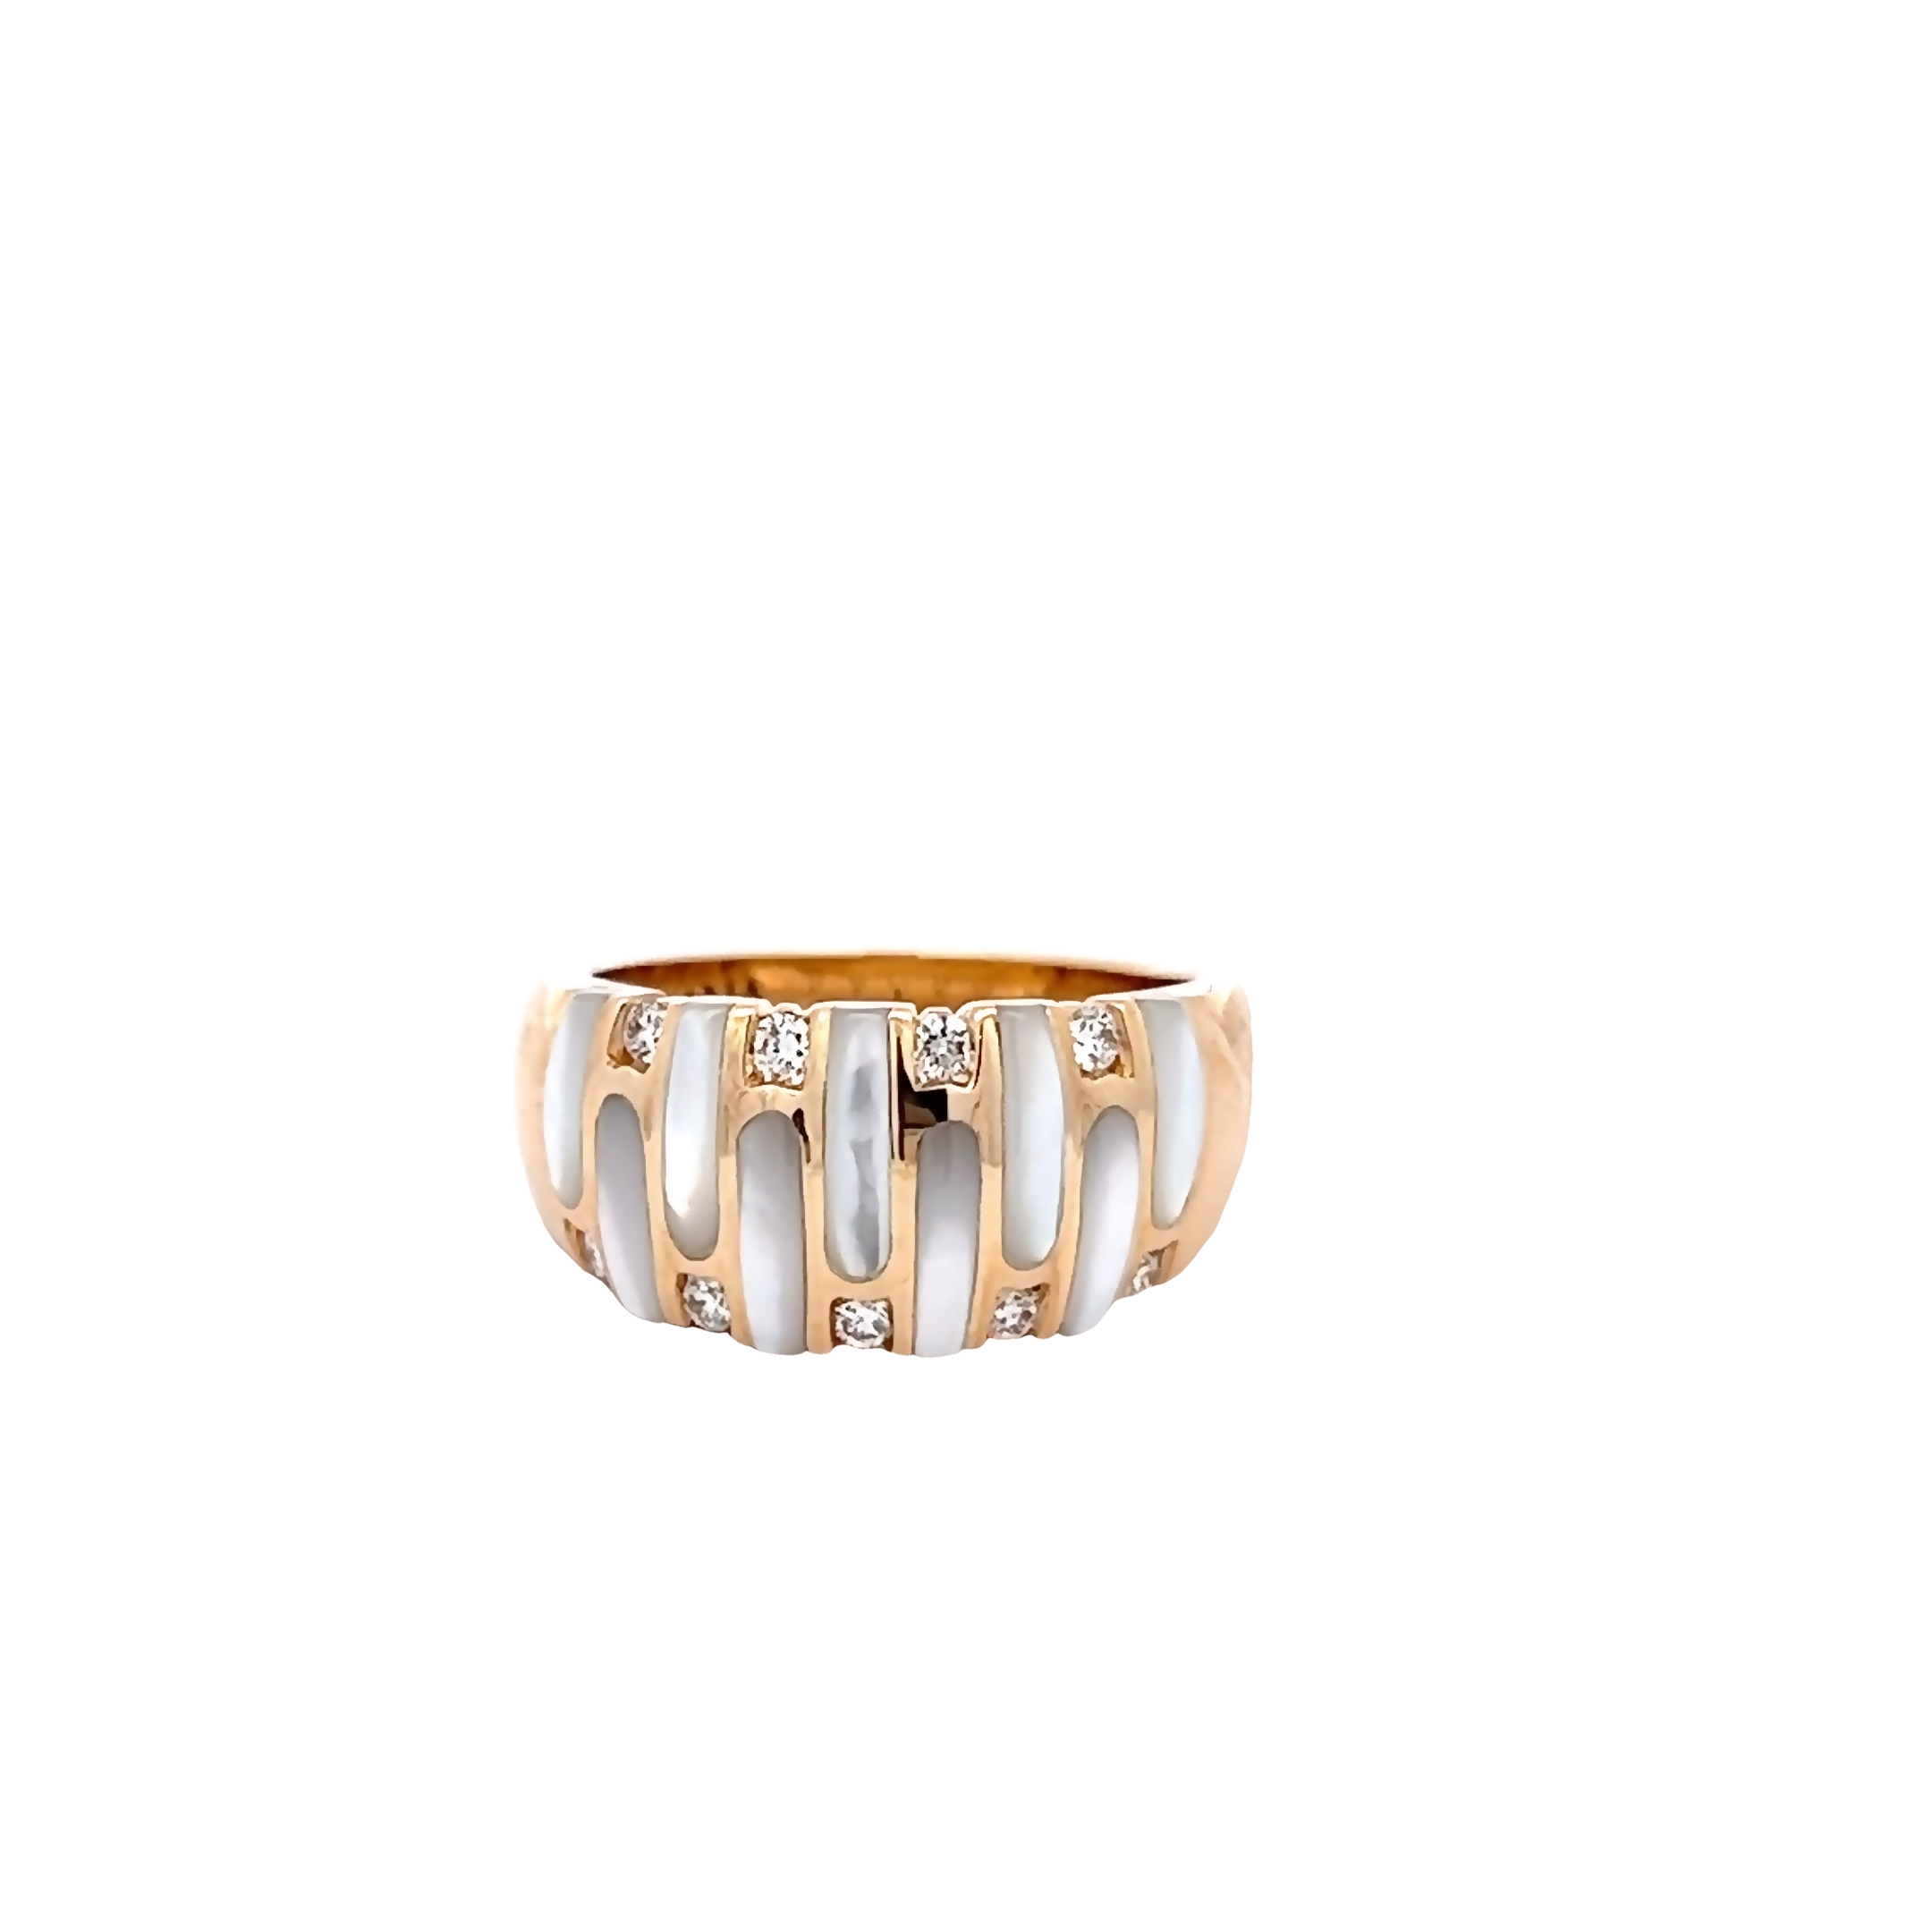 14 Karat yellow gold ring with 9=0.36 total weight round brilliant G VS Diamonds and white Mother of Pearl inlay. Size 8.